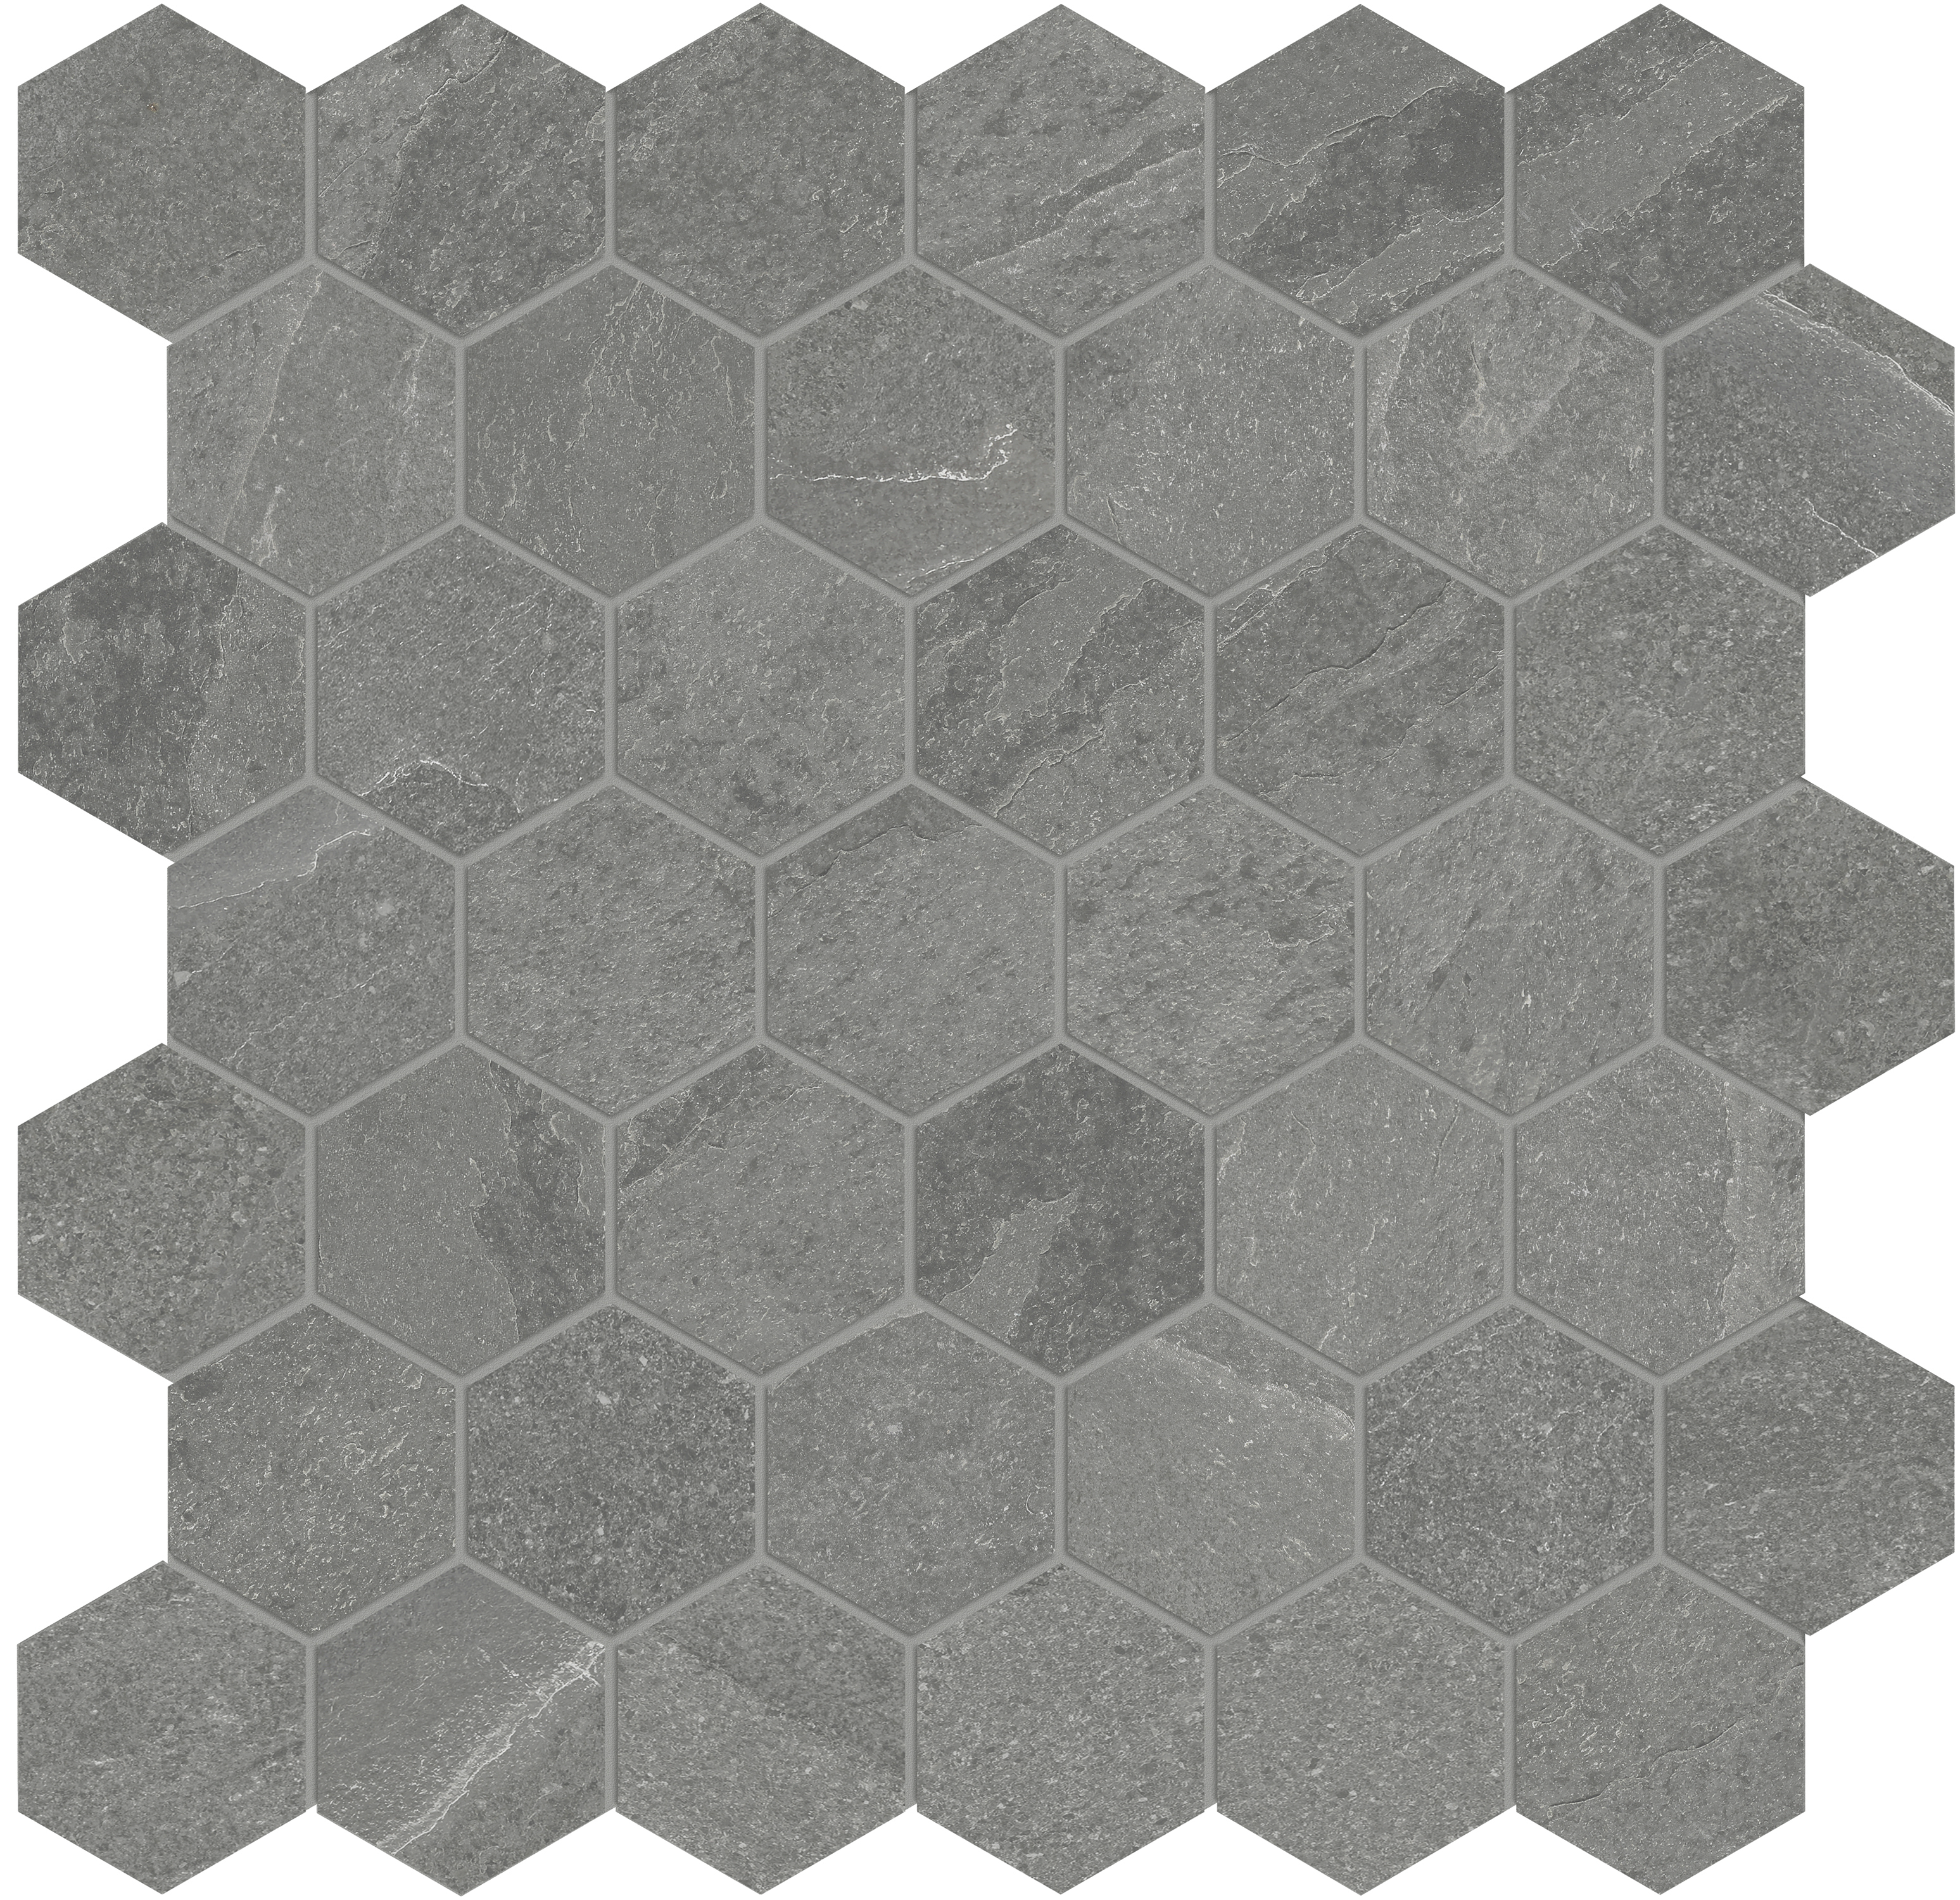 chromium hexagon 2-inch pattern color body porcelain mosaic from nord anatolia collection distributed by surface group international matte finish straight edge edge mesh shape